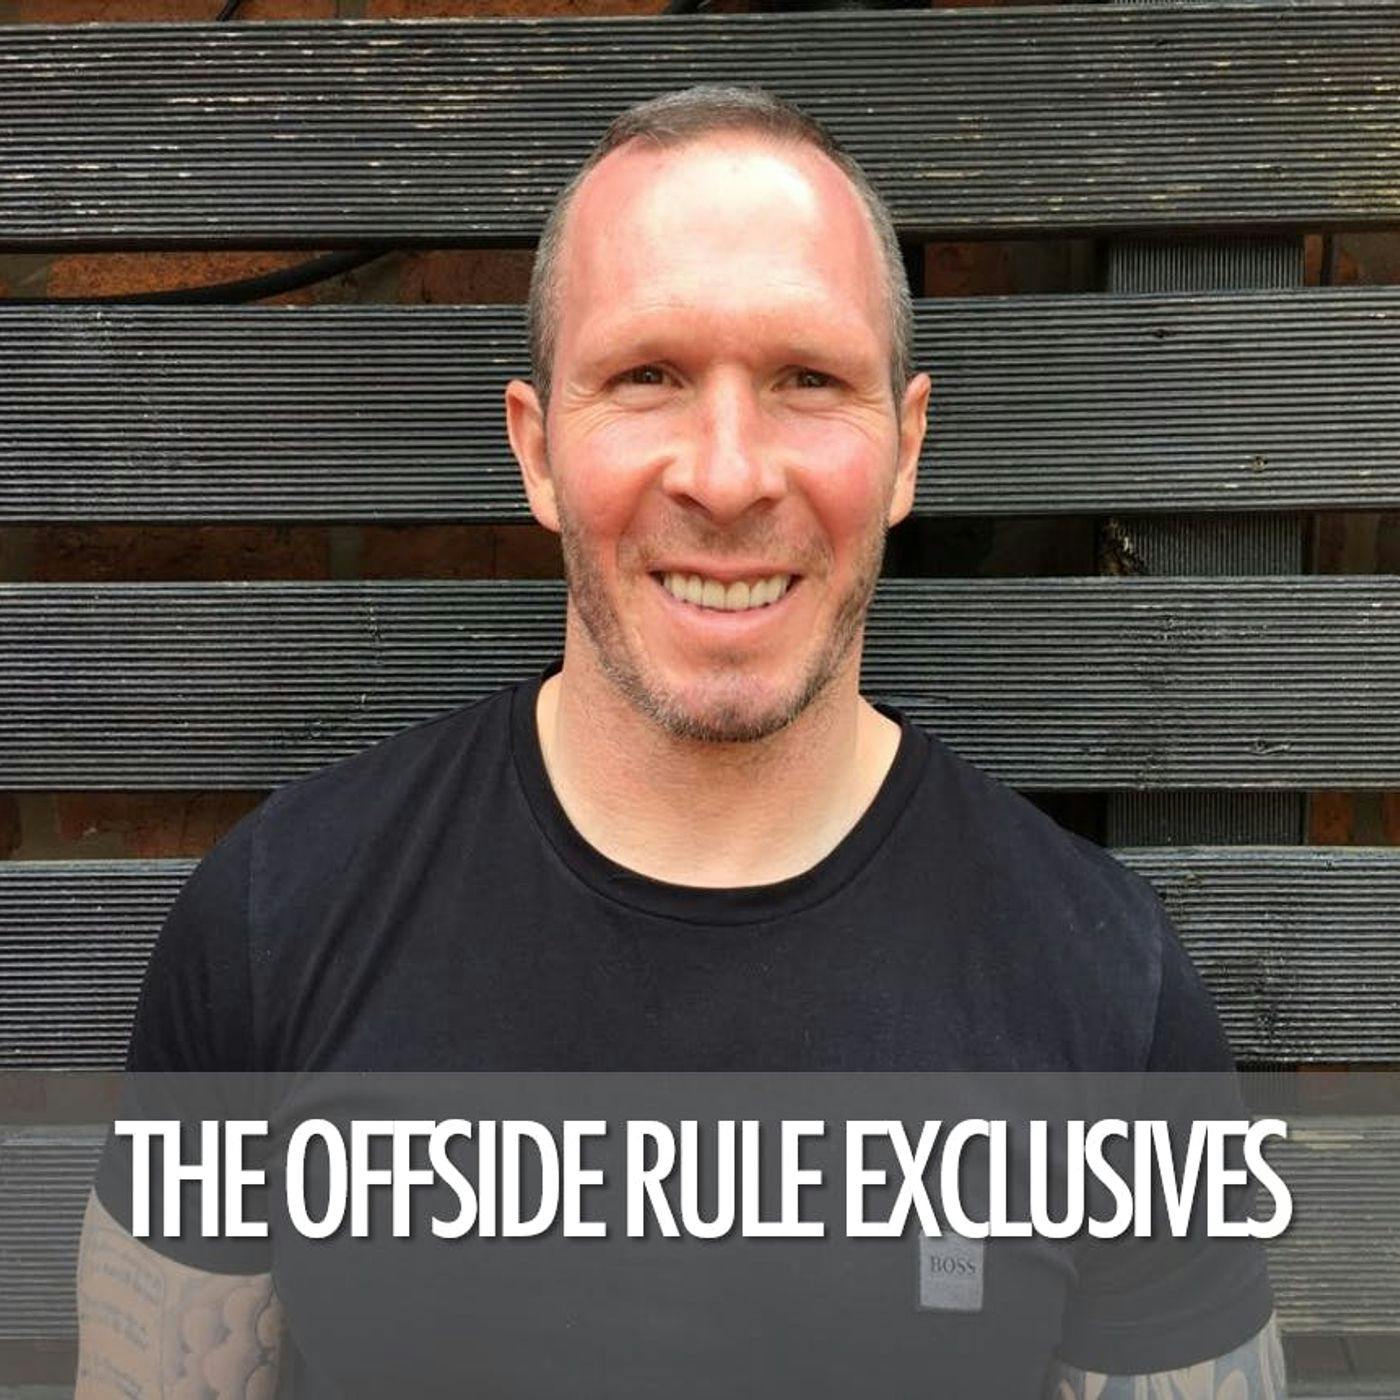 Michael Appleton: The Offside Rule Exclusives